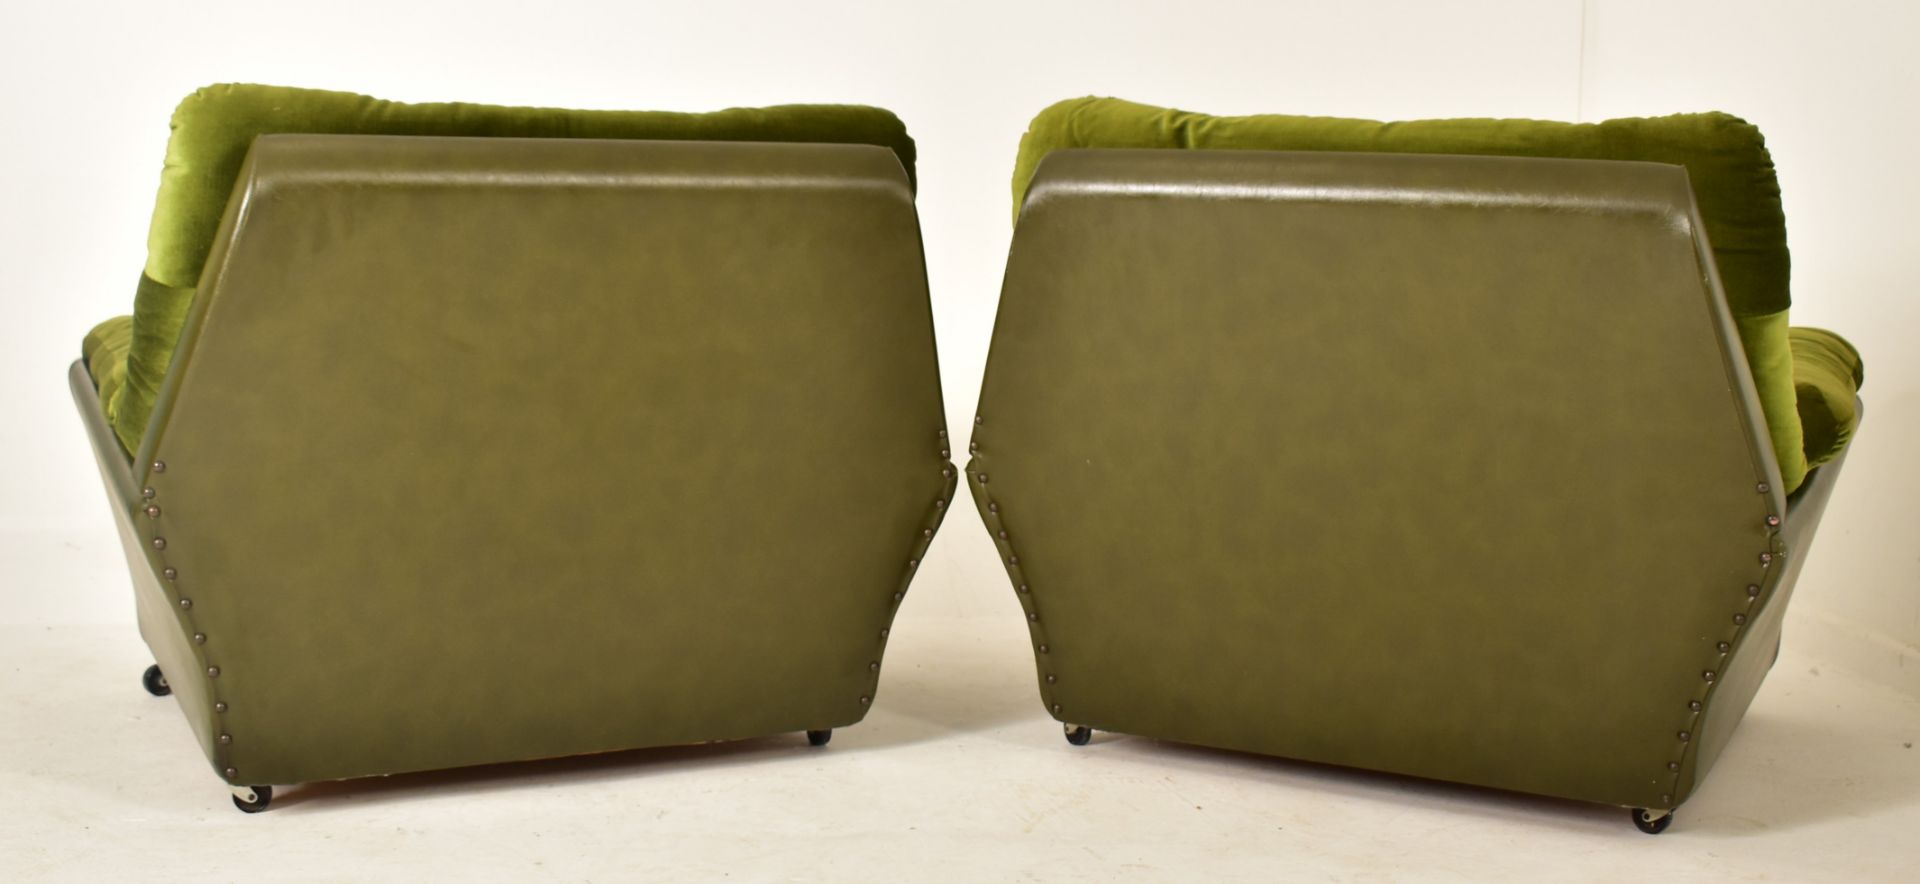 DYKES FURNITURE - PAIR OF MID CENTURY SCOTTISH ARMCHAIRS - Image 3 of 5